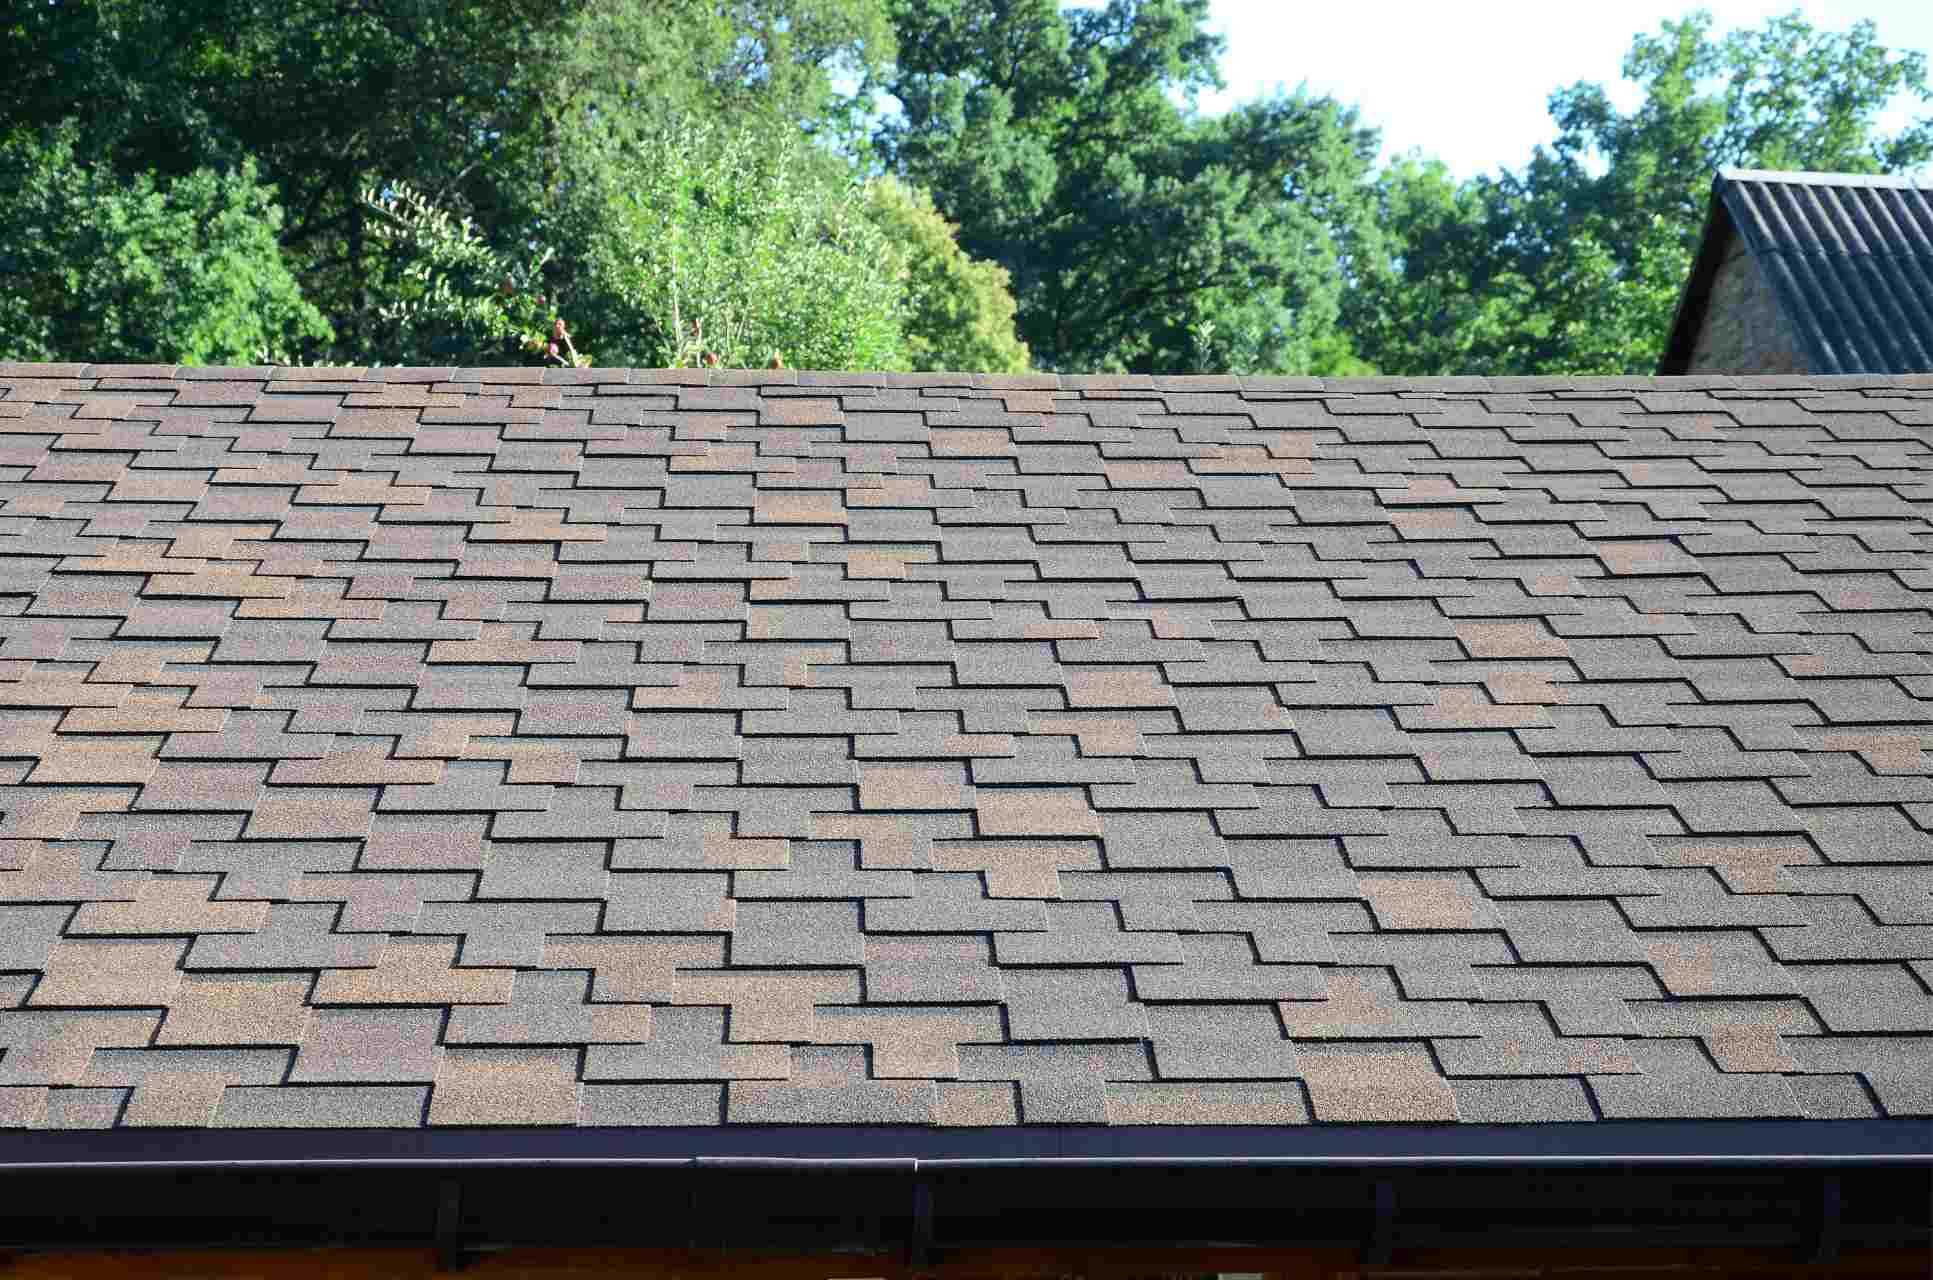 What Are the Benefits of a New Roof?